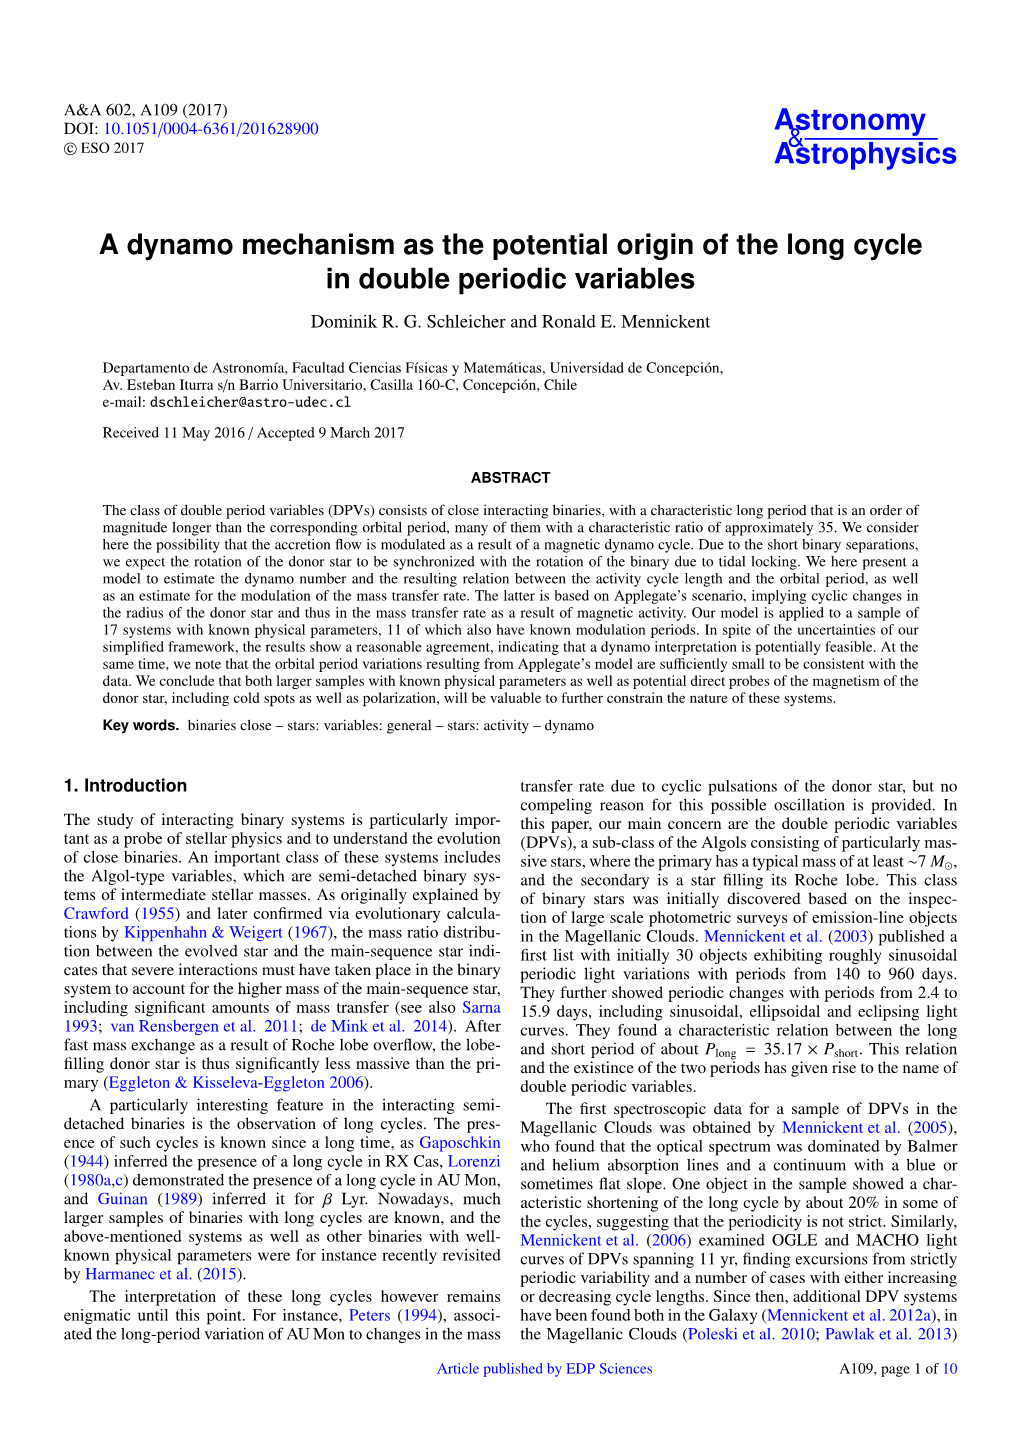 A Dynamo Mechanism As the Potential Origin of the Long Cycle in Double Periodic Variables Dominik R